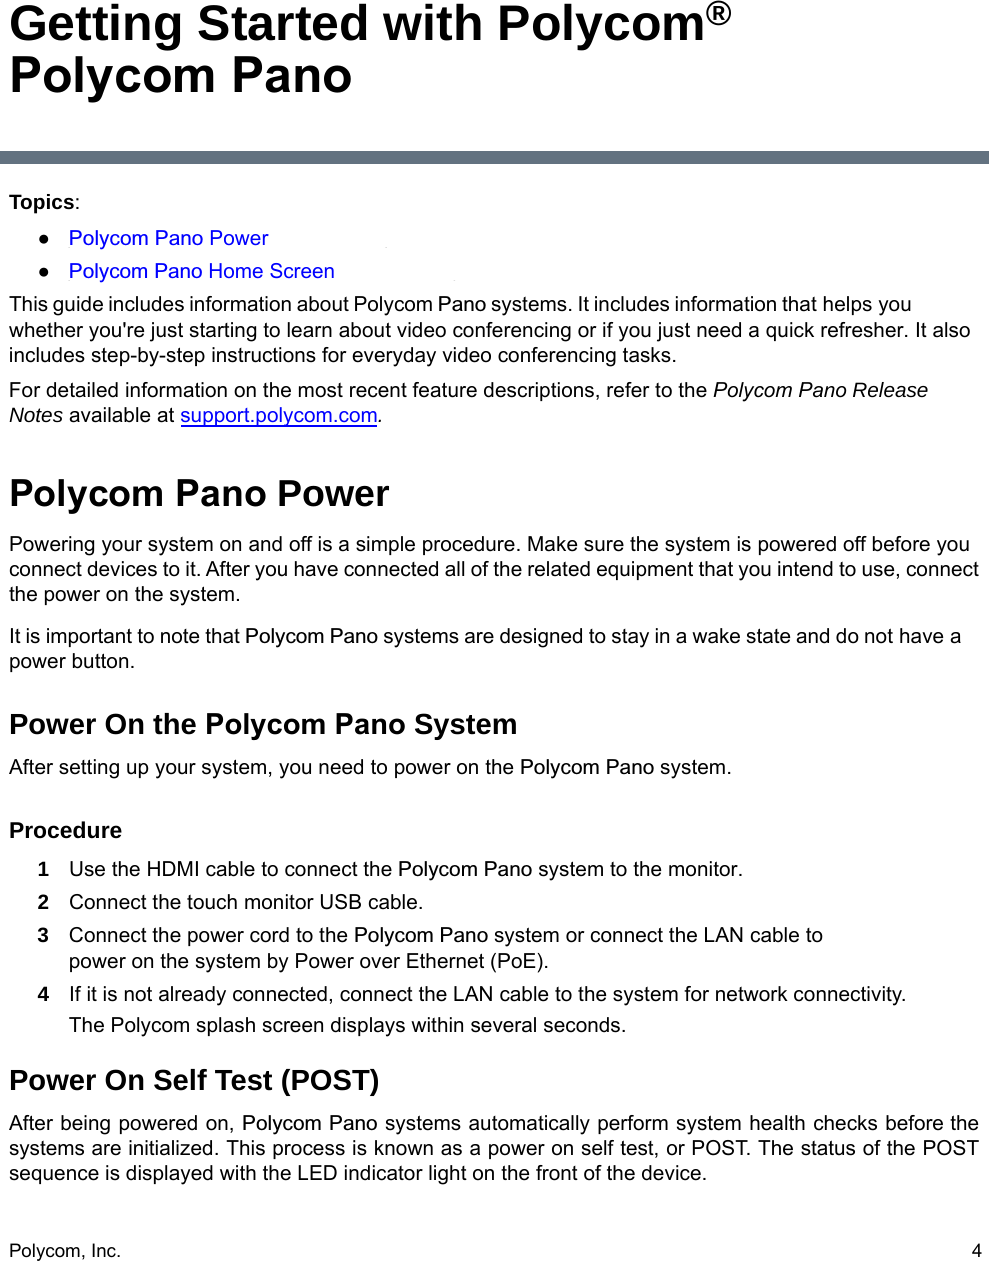 Polycom, Inc.  4Getting Started with Polycom® Polycom PanoTopics:●Polycom Pano Power●Polycom Pano Home ScreenThis guide includes information about Polycom Pano systems. It includes information that helps you whether you&apos;re just starting to learn about video conferencing or if you just need a quick refresher. It also includes step-by-step instructions for everyday video conferencing tasks. For detailed information on the most recent feature descriptions, refer to the Polycom Pano Release Notes available at support.polycom.com.Polycom Pano PowerPowering your system on and off is a simple procedure. Make sure the system is powered off before you connect devices to it. After you have connected all of the related equipment that you intend to use, connect the power on the system.It is important to note that Polycom Pano systems are designed to stay in a wake state and do not have a power button.Power On the Polycom Pano SystemAfter setting up your system, you need to power on the Polycom Pano system. Procedure1 Use the HDMI cable to connect the Polycom Pano system to the monitor.2 Connect the touch monitor USB cable.3 Connect the power cord to the Polycom Pano system or connect the LAN cable to power on the system by Power over Ethernet (PoE).4 If it is not already connected, connect the LAN cable to the system for network connectivity.The Polycom splash screen displays within several seconds.Power On Self Test (POST)After being powered on, Polycom Pano systems automatically perform system health checks before the systems are initialized. This process is known as a power on self test, or POST. The status of the POST sequence is displayed with the LED indicator light on the front of the device.